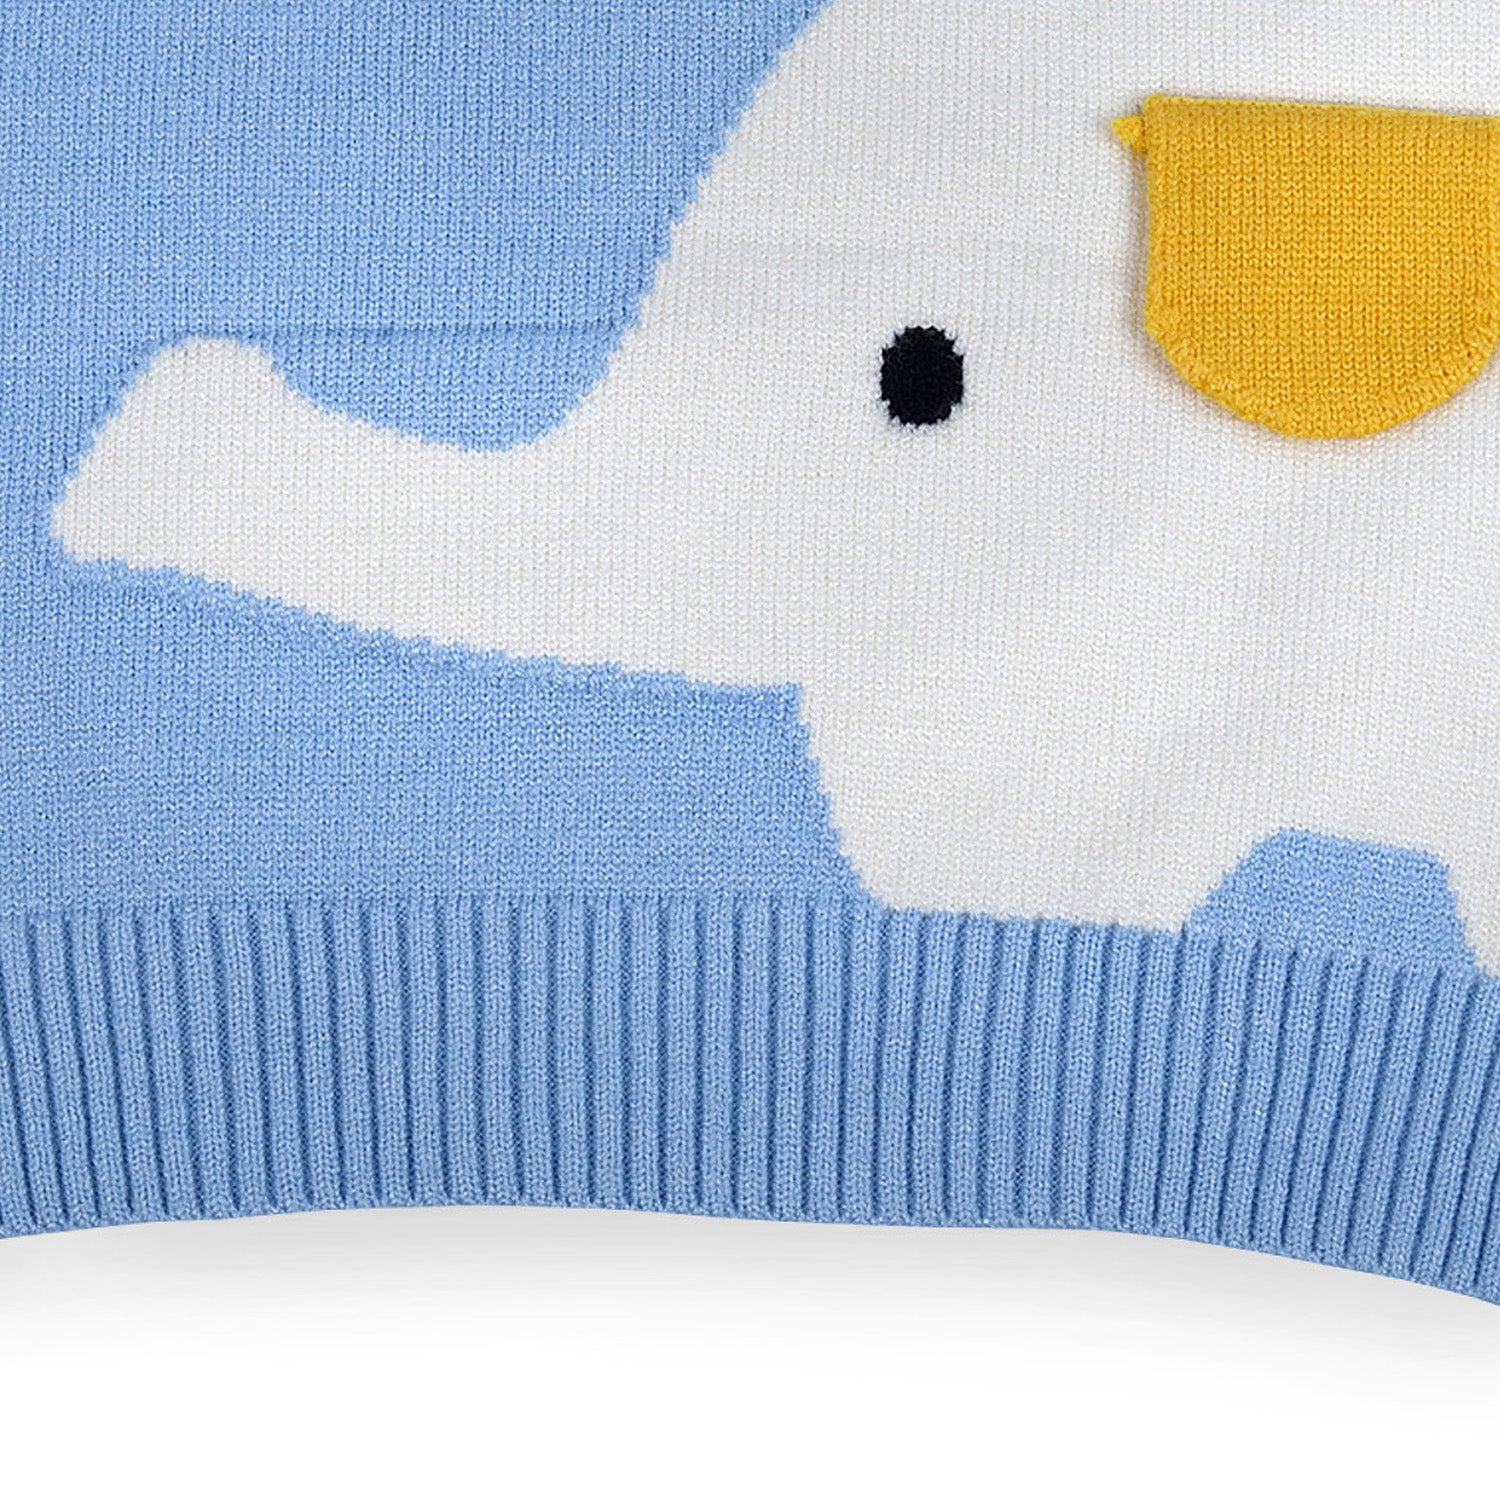 Elephant With 3D Ear Premium Full Sleeves Knitted Sweater - Blue - Baby Moo